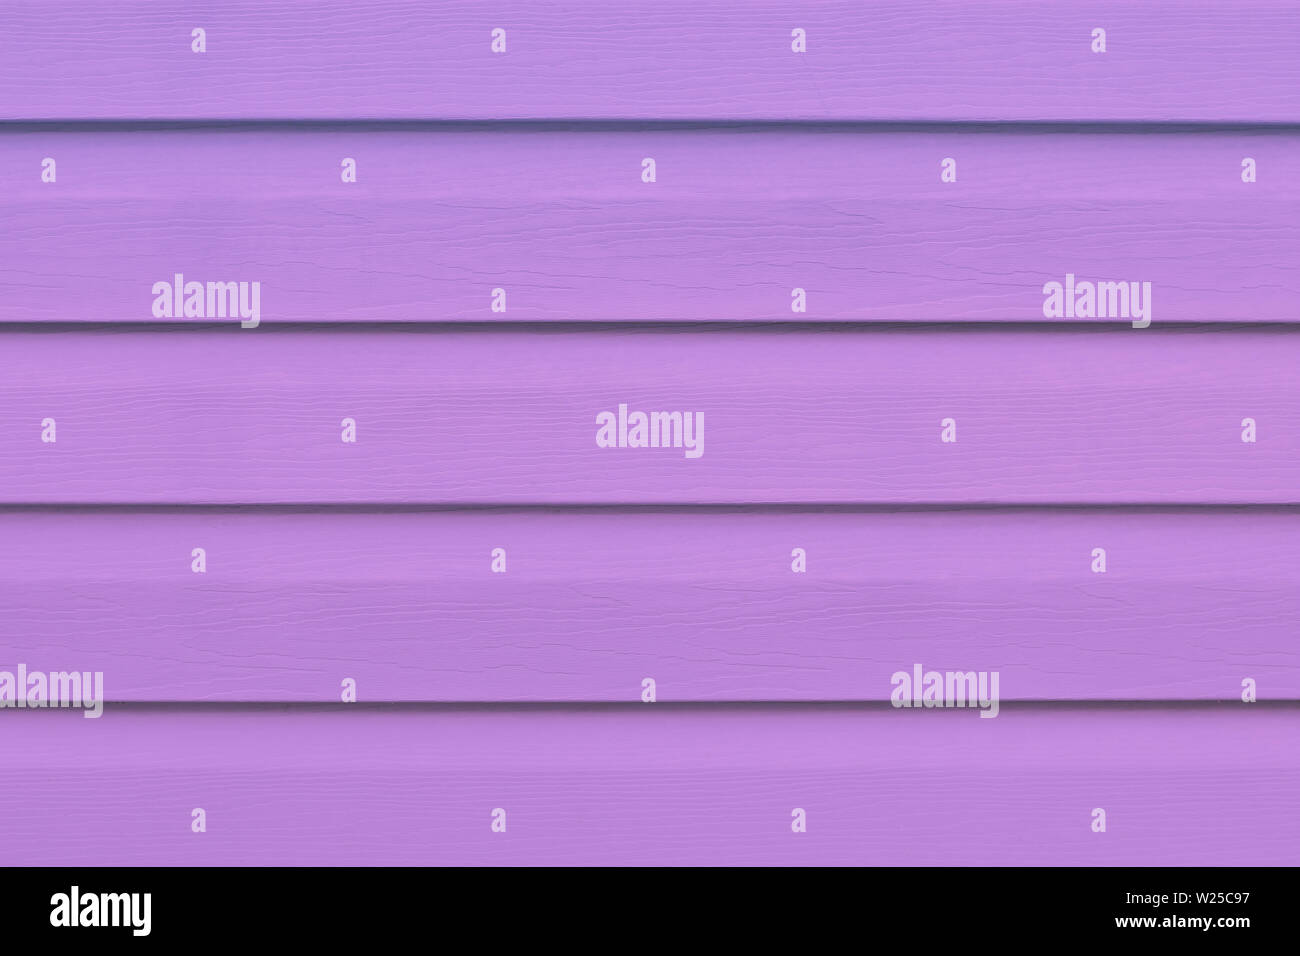 Violet wooden texture in lines, purple wood background. Pattern with pink wood planks on wall, floor. Wooden boards. Empty space. Siding frame striped Stock Photo